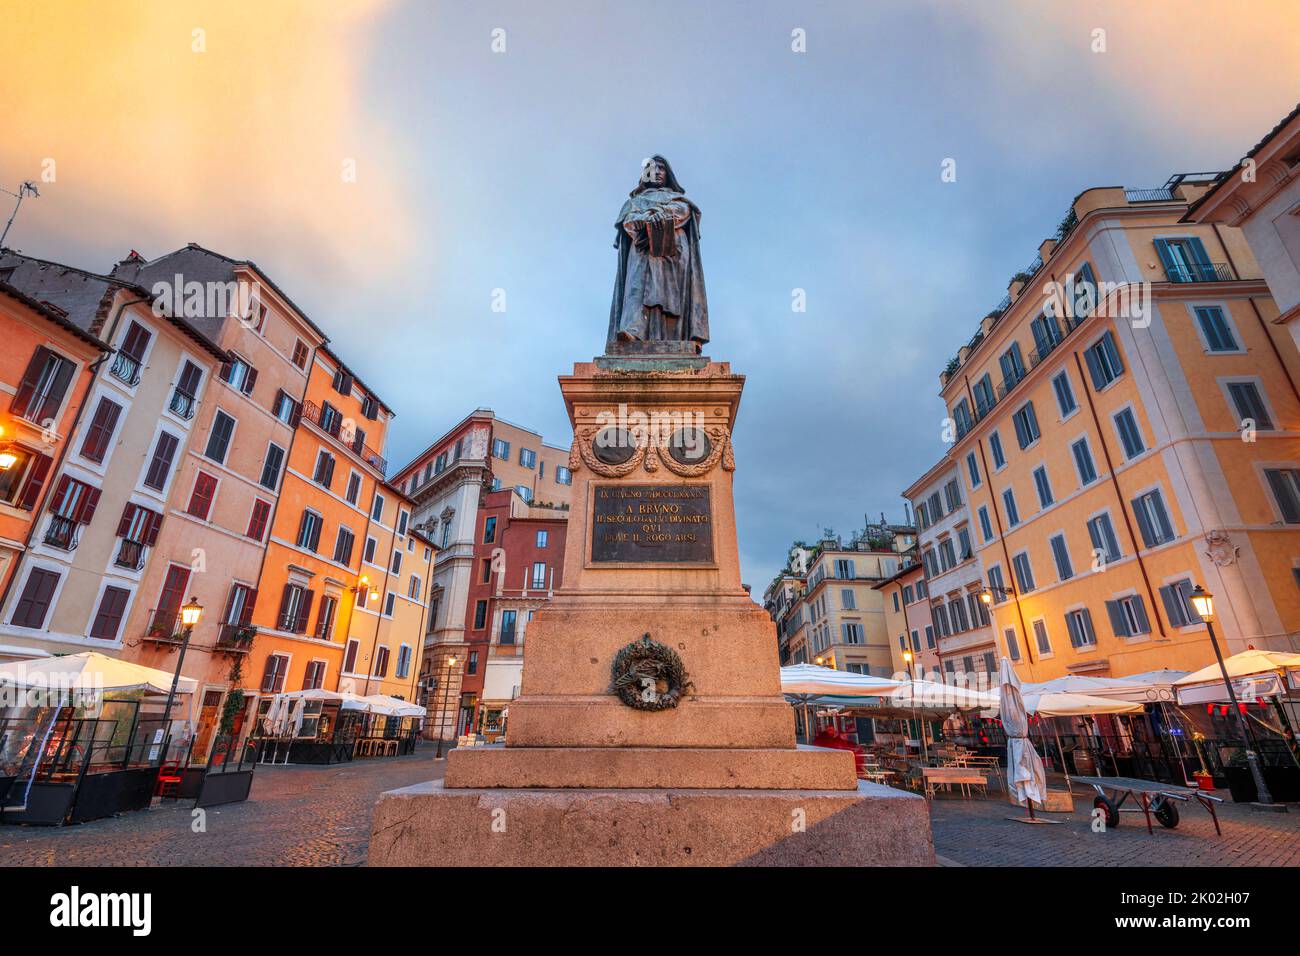 Campo de' Fiori in Rome, Italy at dawn. (Inscription reads: June 9, 1869 To Bruno - from the age he divined  - here where the fire burned). Stock Photo